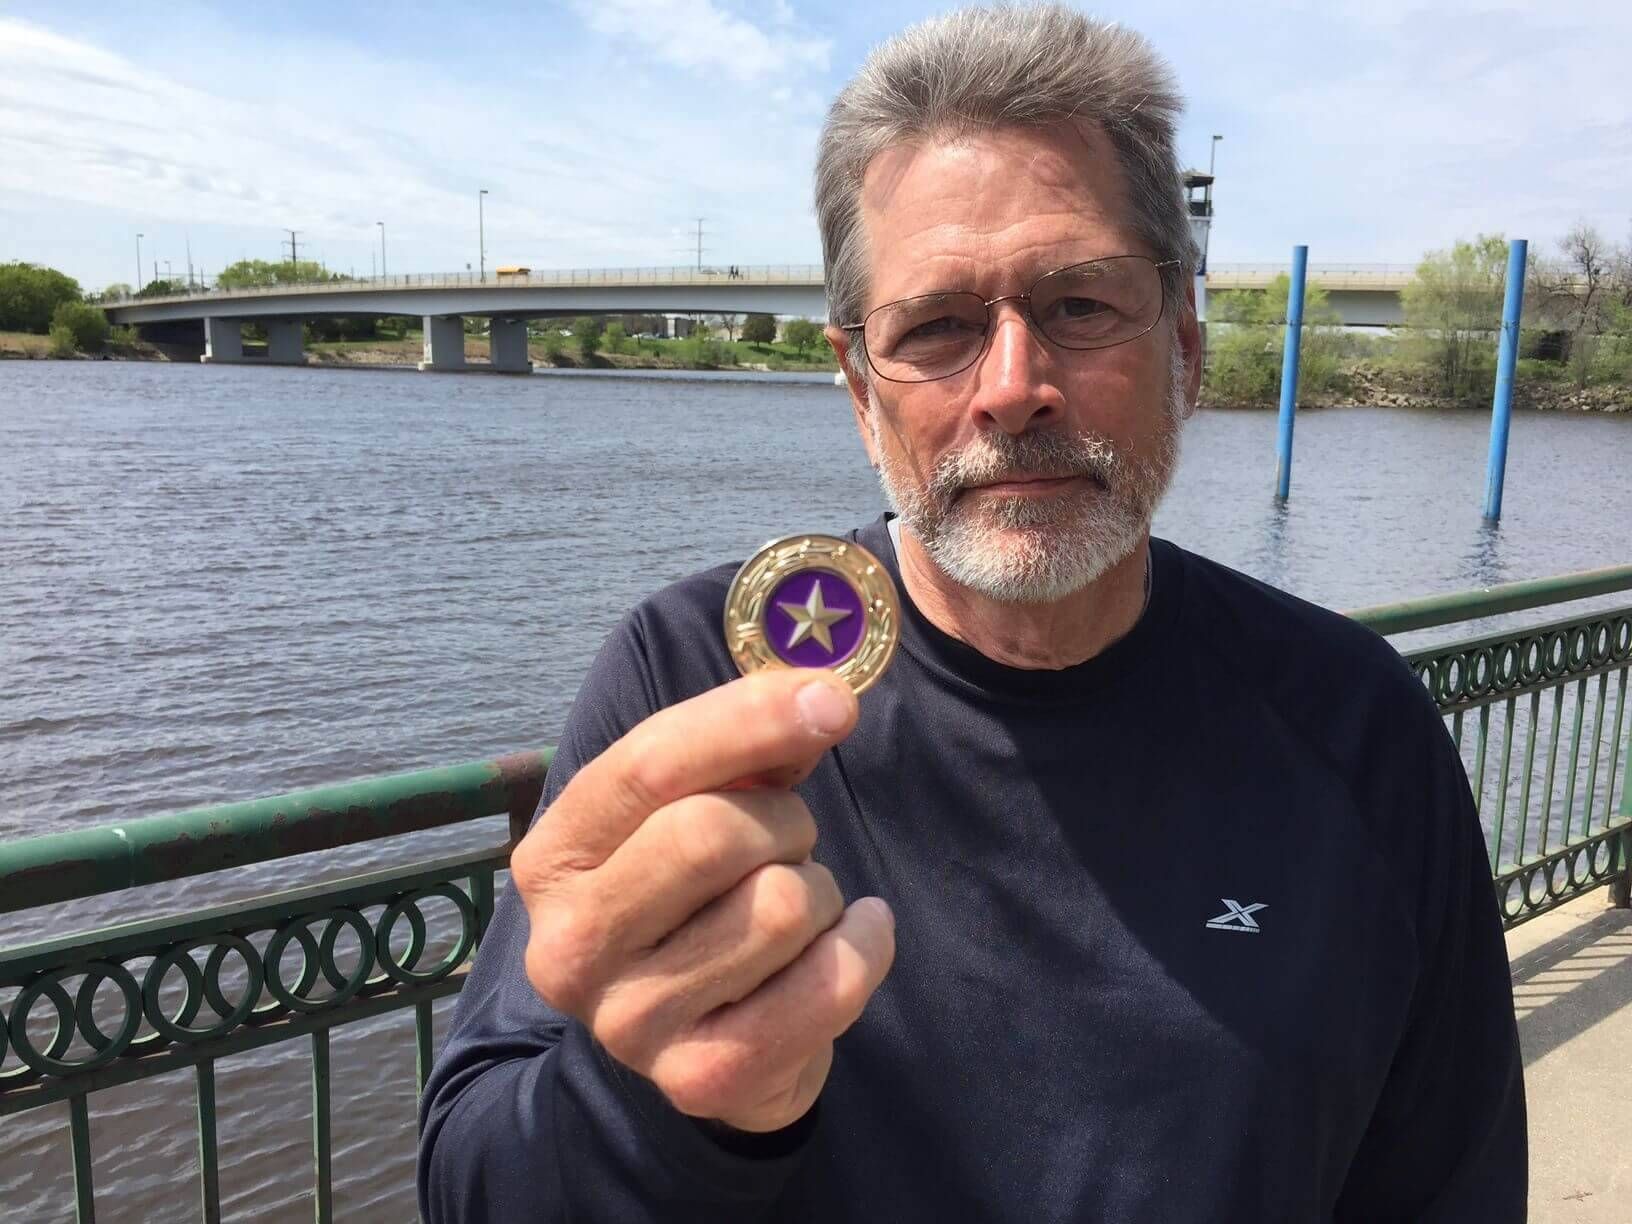 Man holding a coin with a star on it